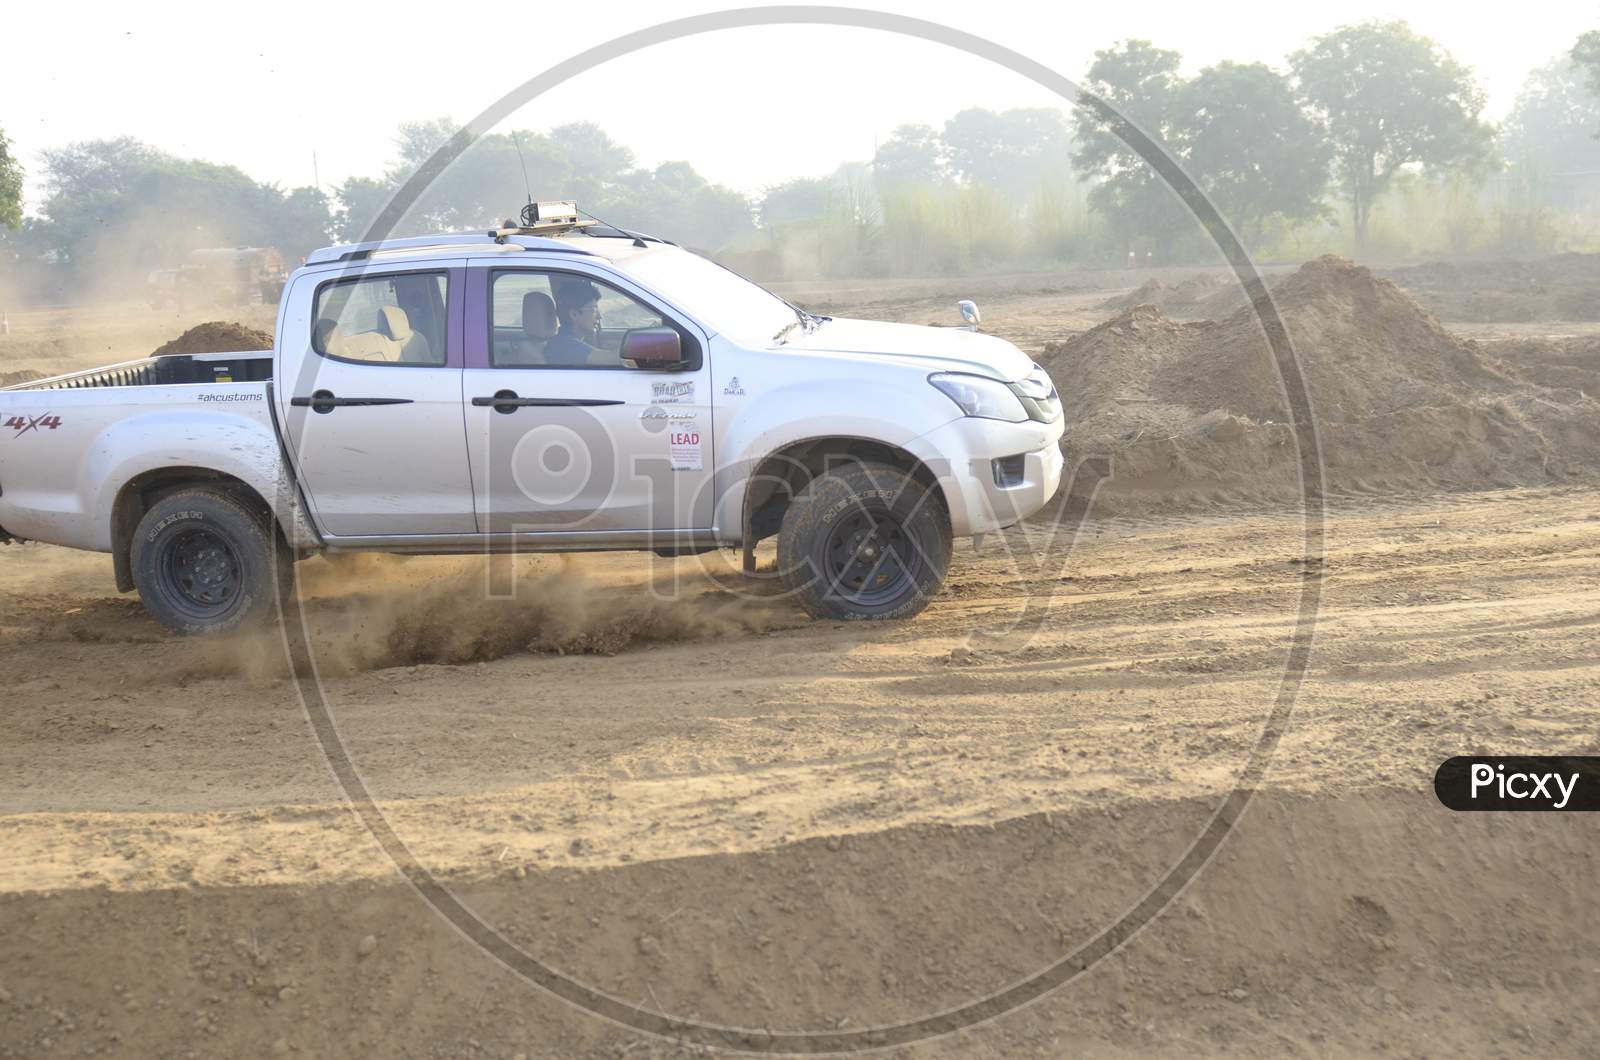 ISUZU Car Or  Off-Road Vehicle  in an Rally Championship  With Drifting And Sand and Soil  Splashes on Rally Tracks